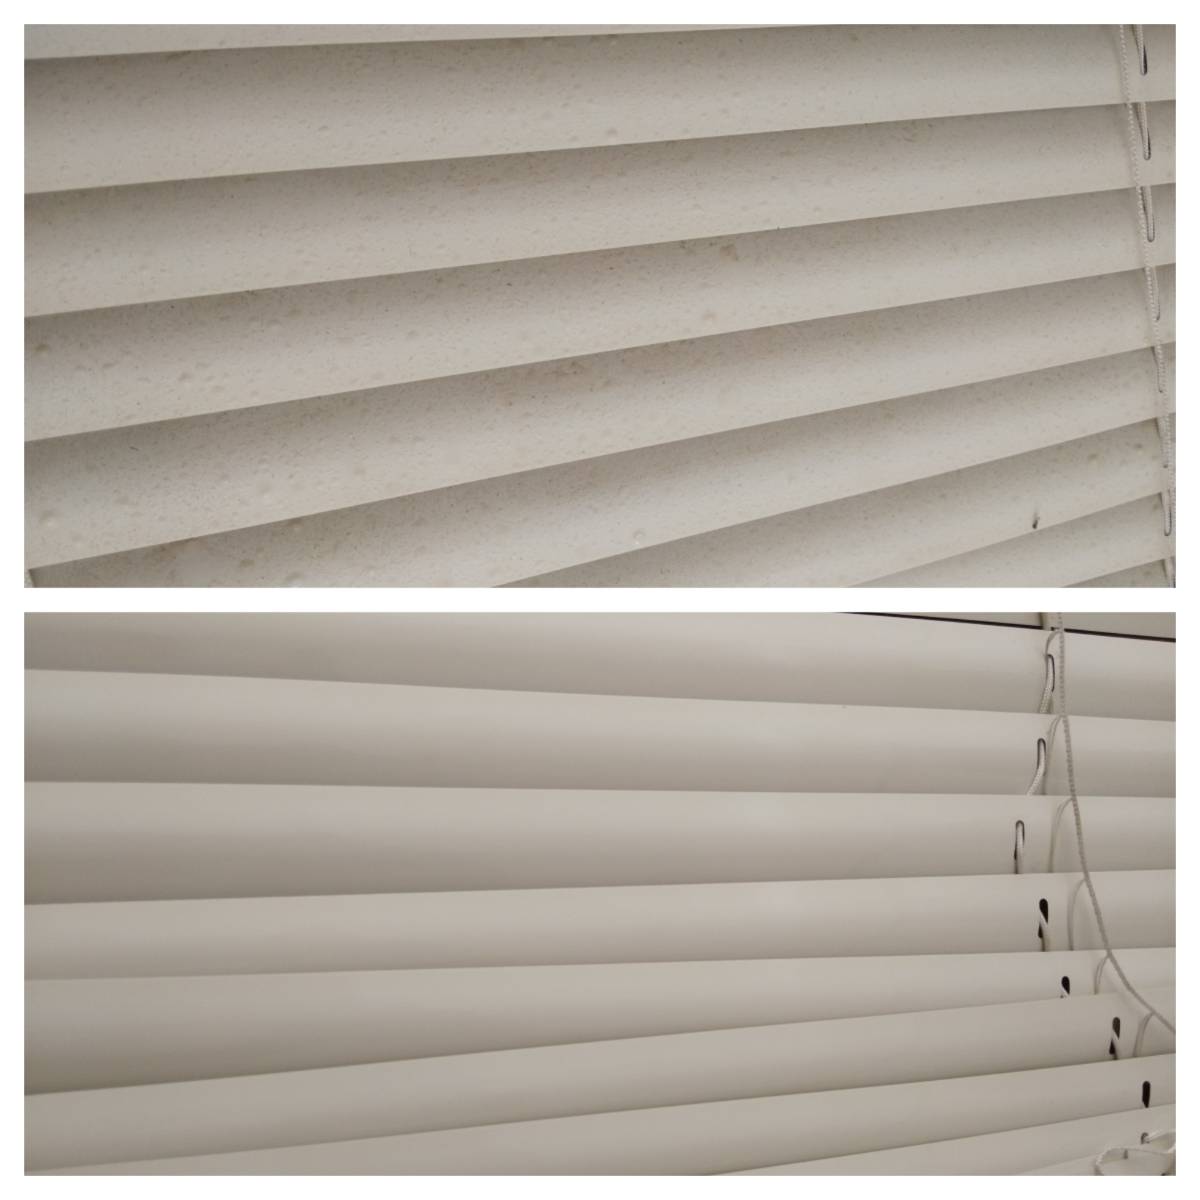 View Photo: Clean blinds!